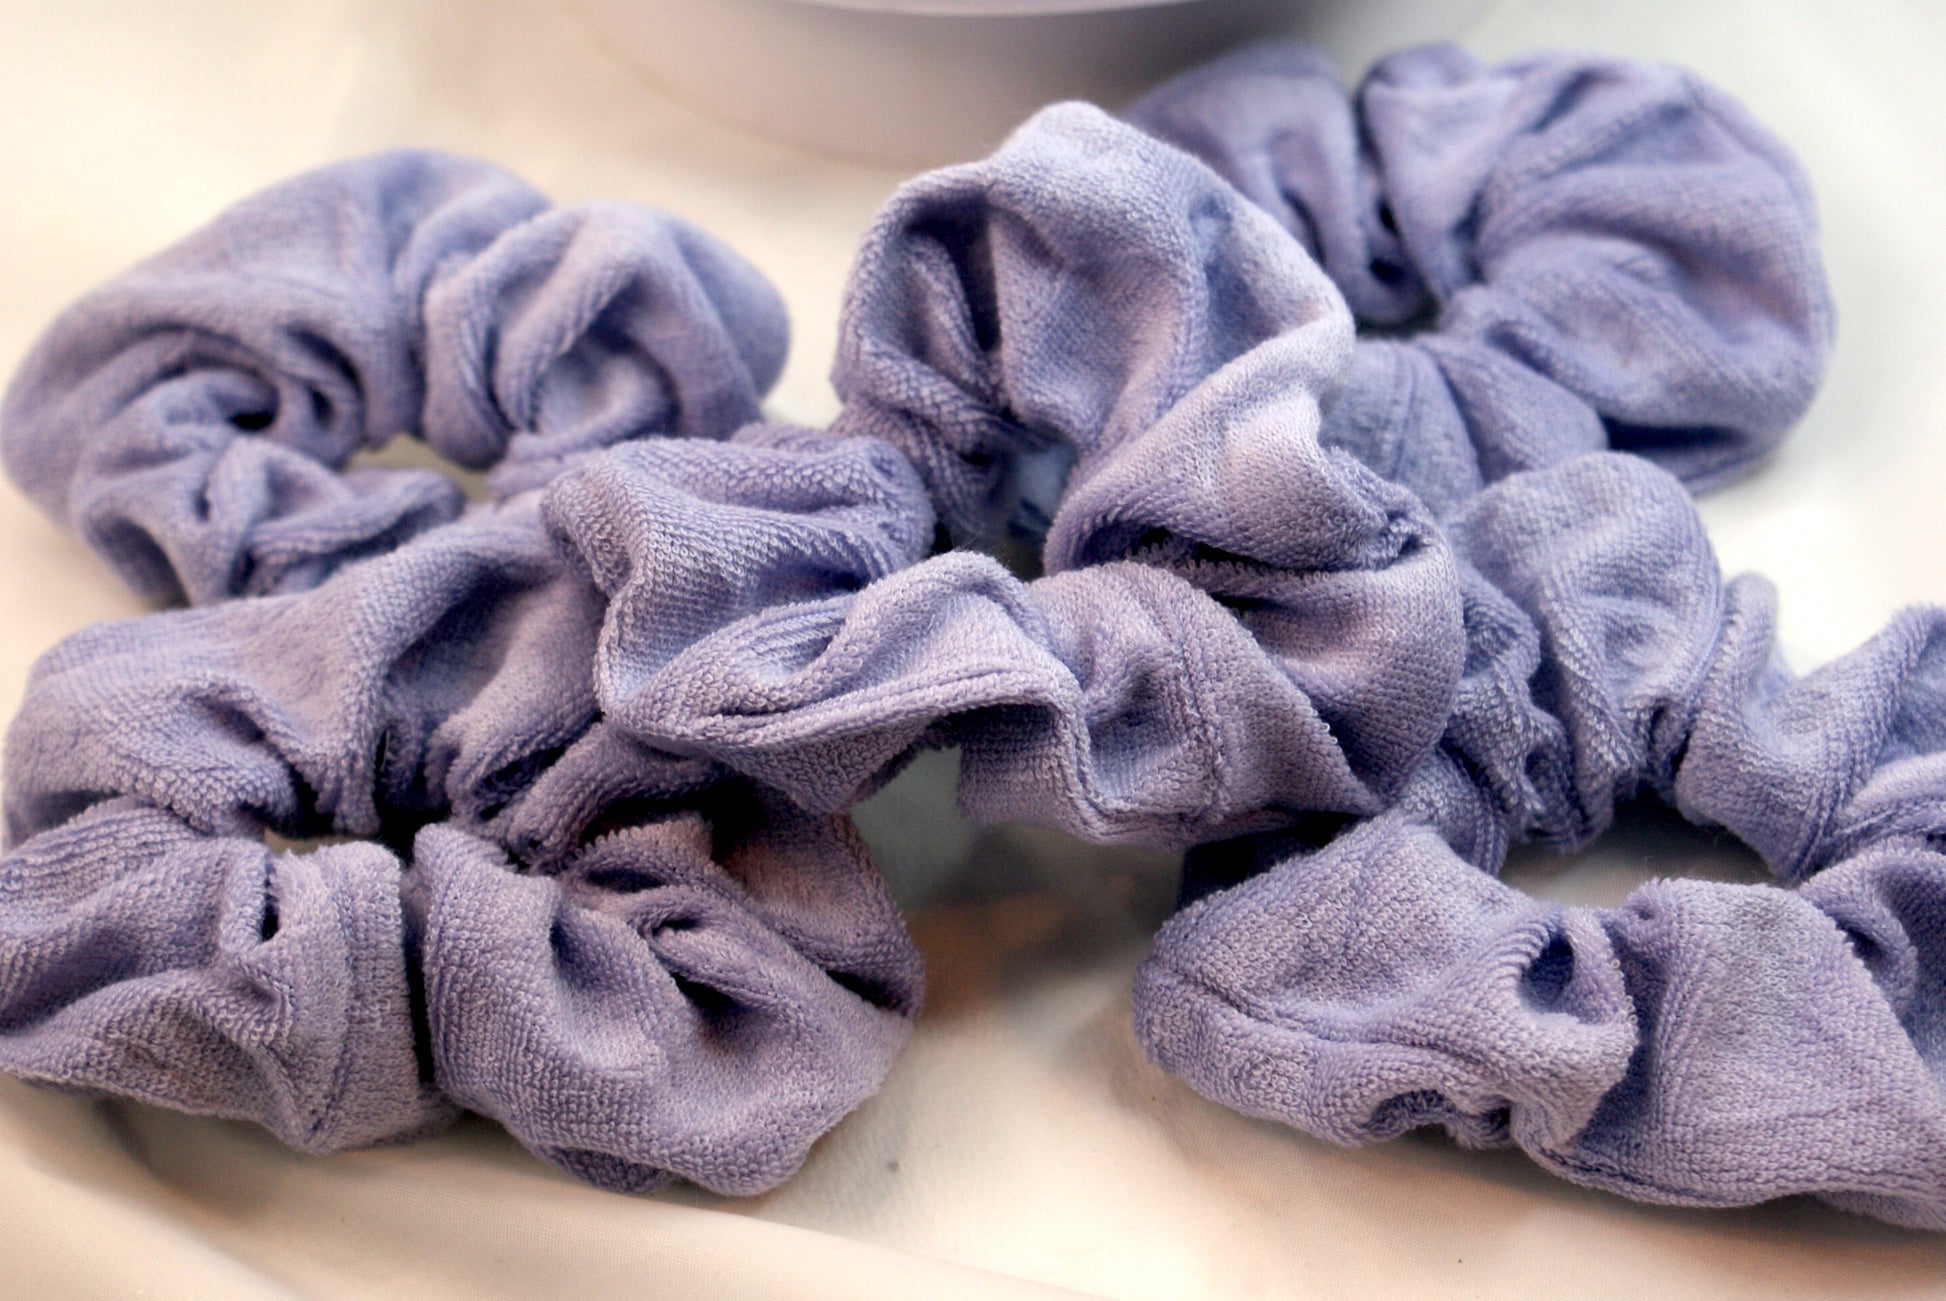 Made from microfiber material, these towel scrunchies are incredibly absorbent.